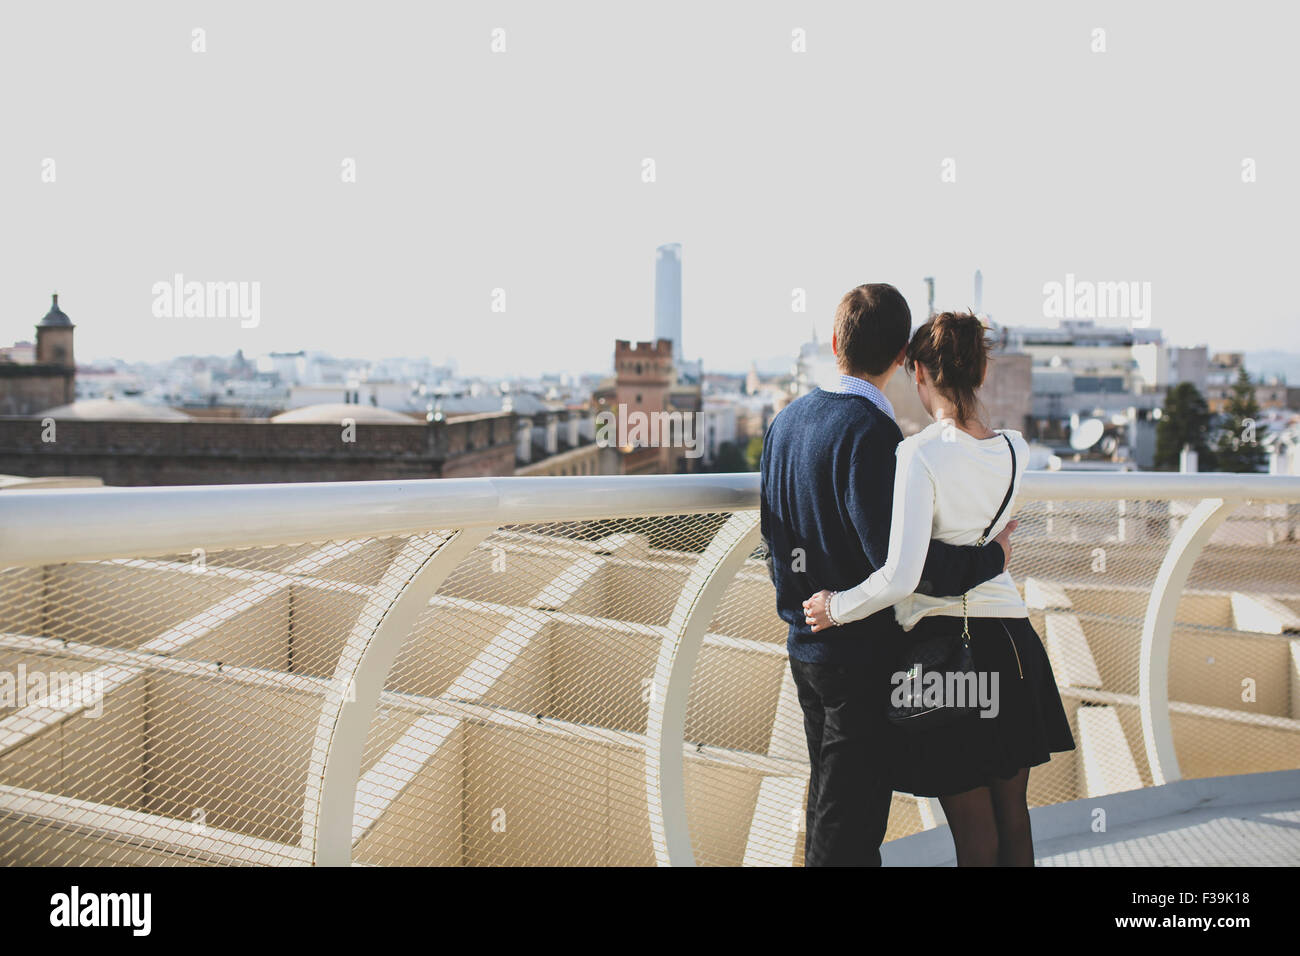 Portrait of a young couple looking at city views, Seville, Andalusia, Spain Stock Photo